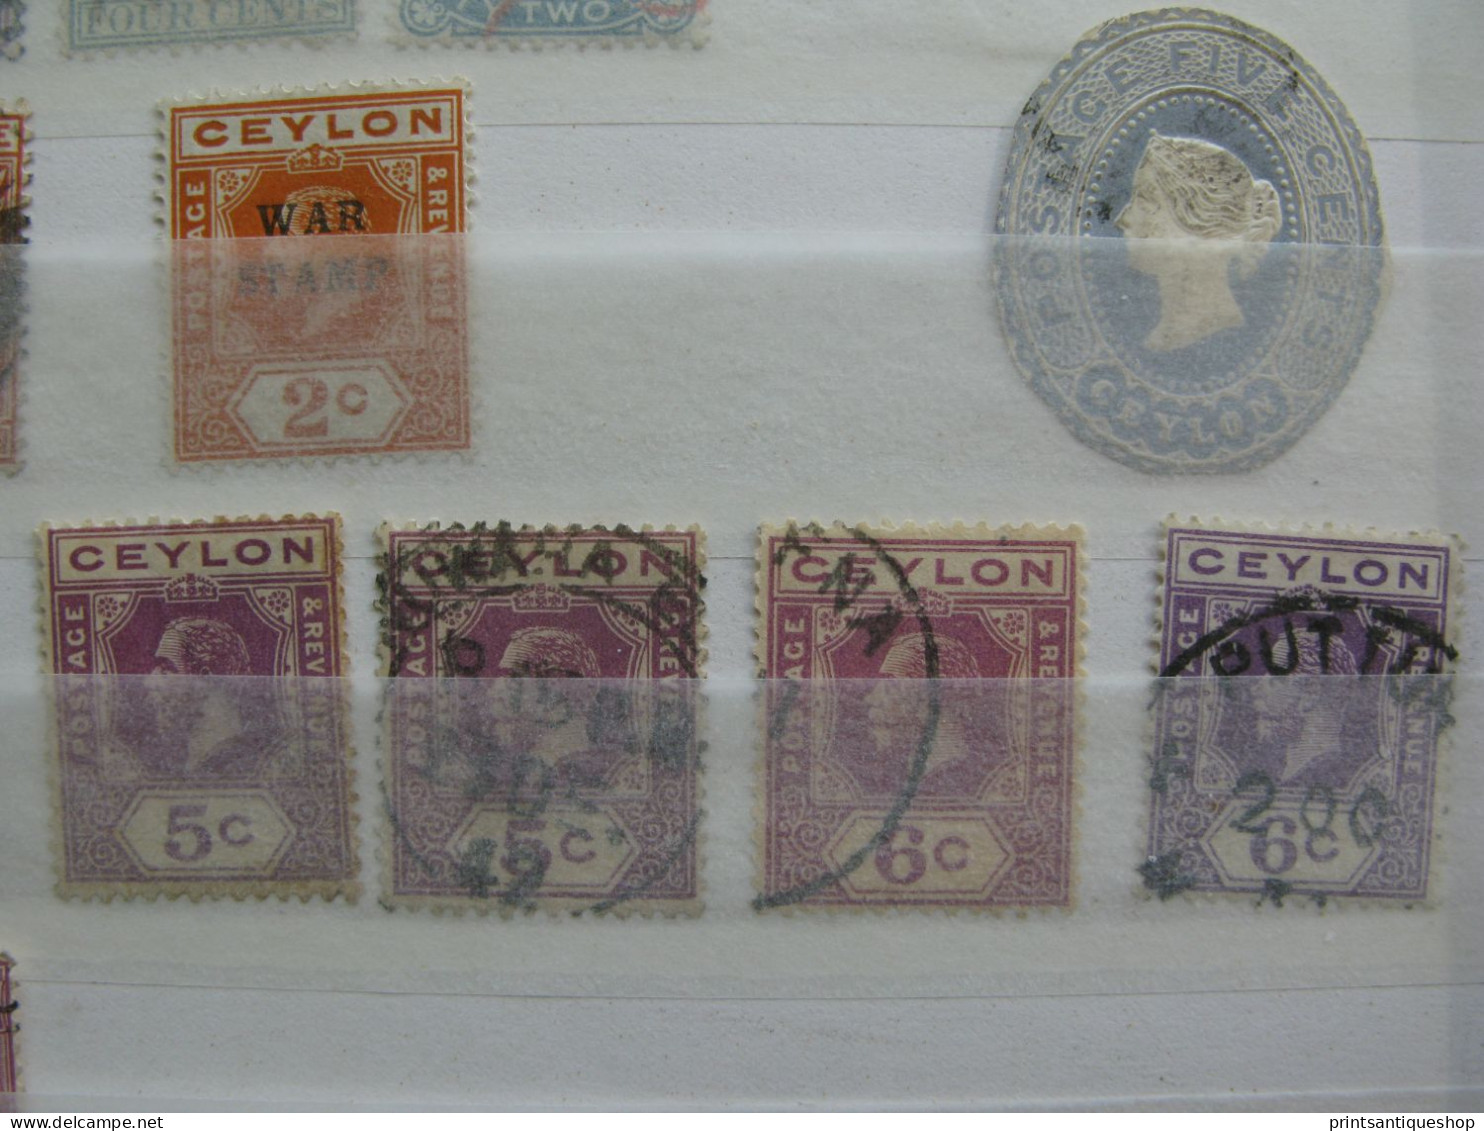 lot 3 pages CEYLON  KGV, Surcharge war stamp (# 57 Queen Victoria 1sh VIOLET CAT VALUE $19) Sri Lanka Free delivery